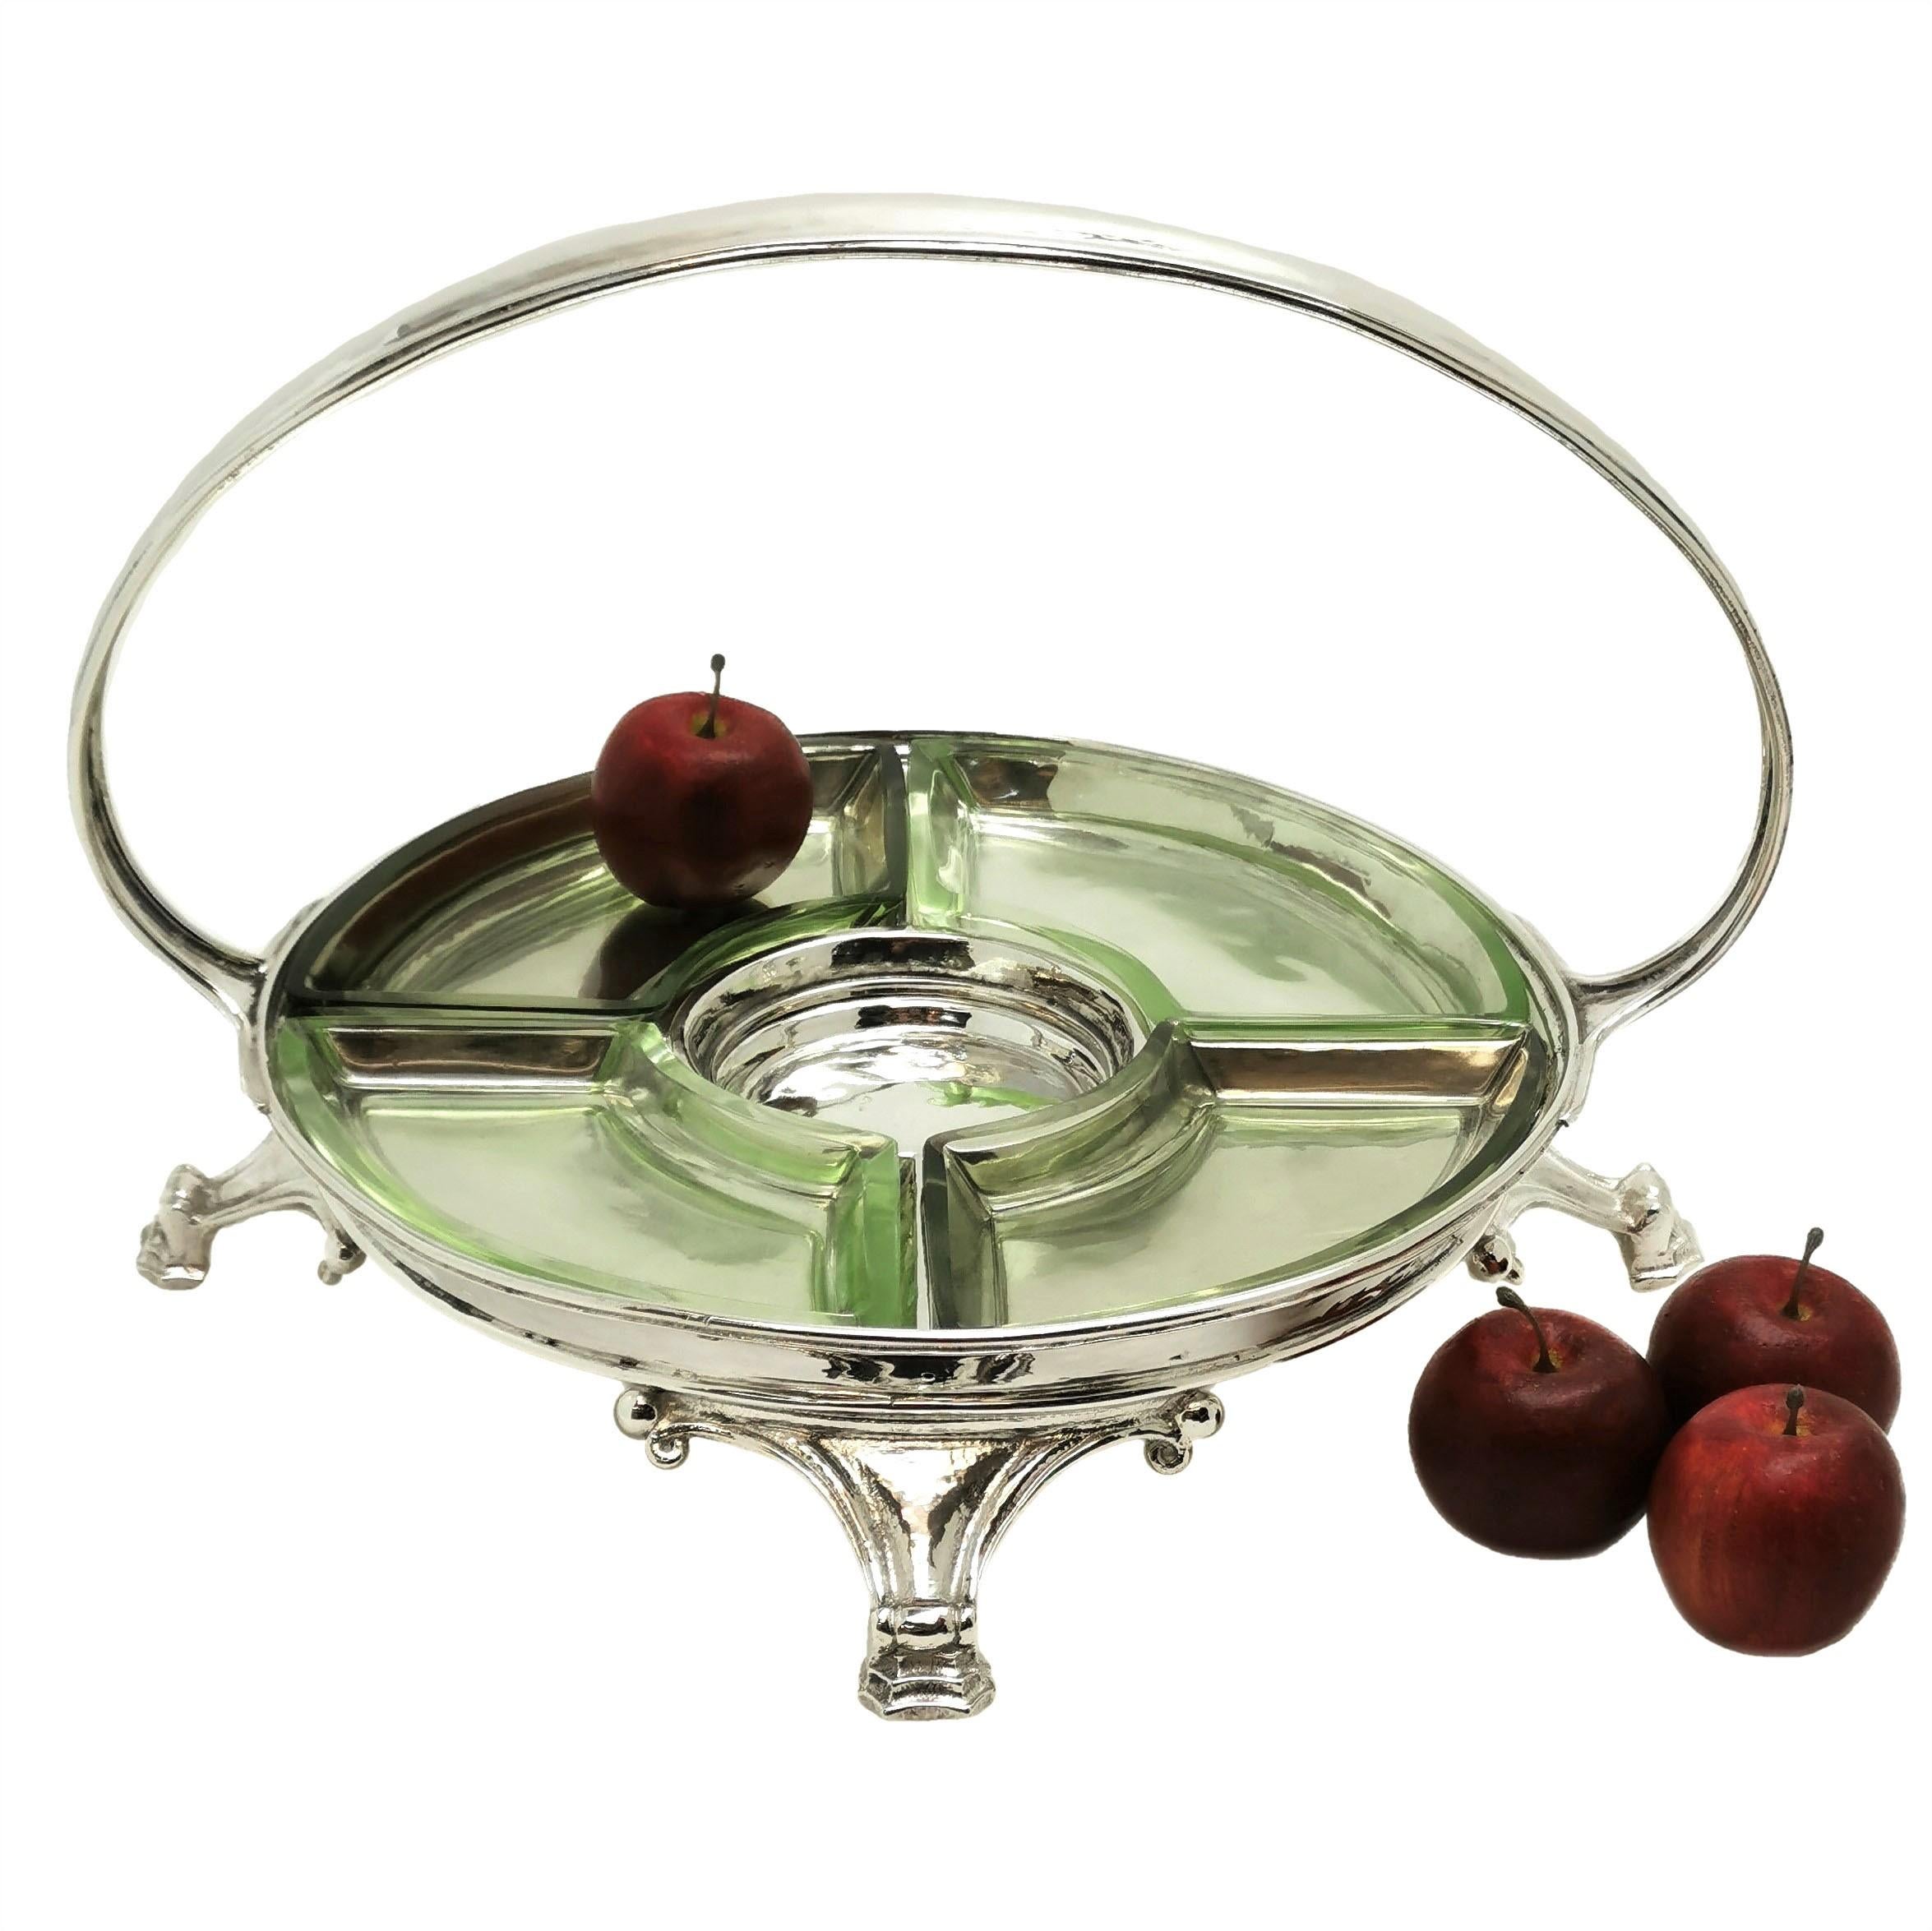 An elegant Hors d'oeuvre sterling silver Hors d'oeuvre serving platter by Ramsden & Carr. The Platter has five separate serving compartments and featured four decorative glass dishes in two subtle shades of green for the outer partitions. The